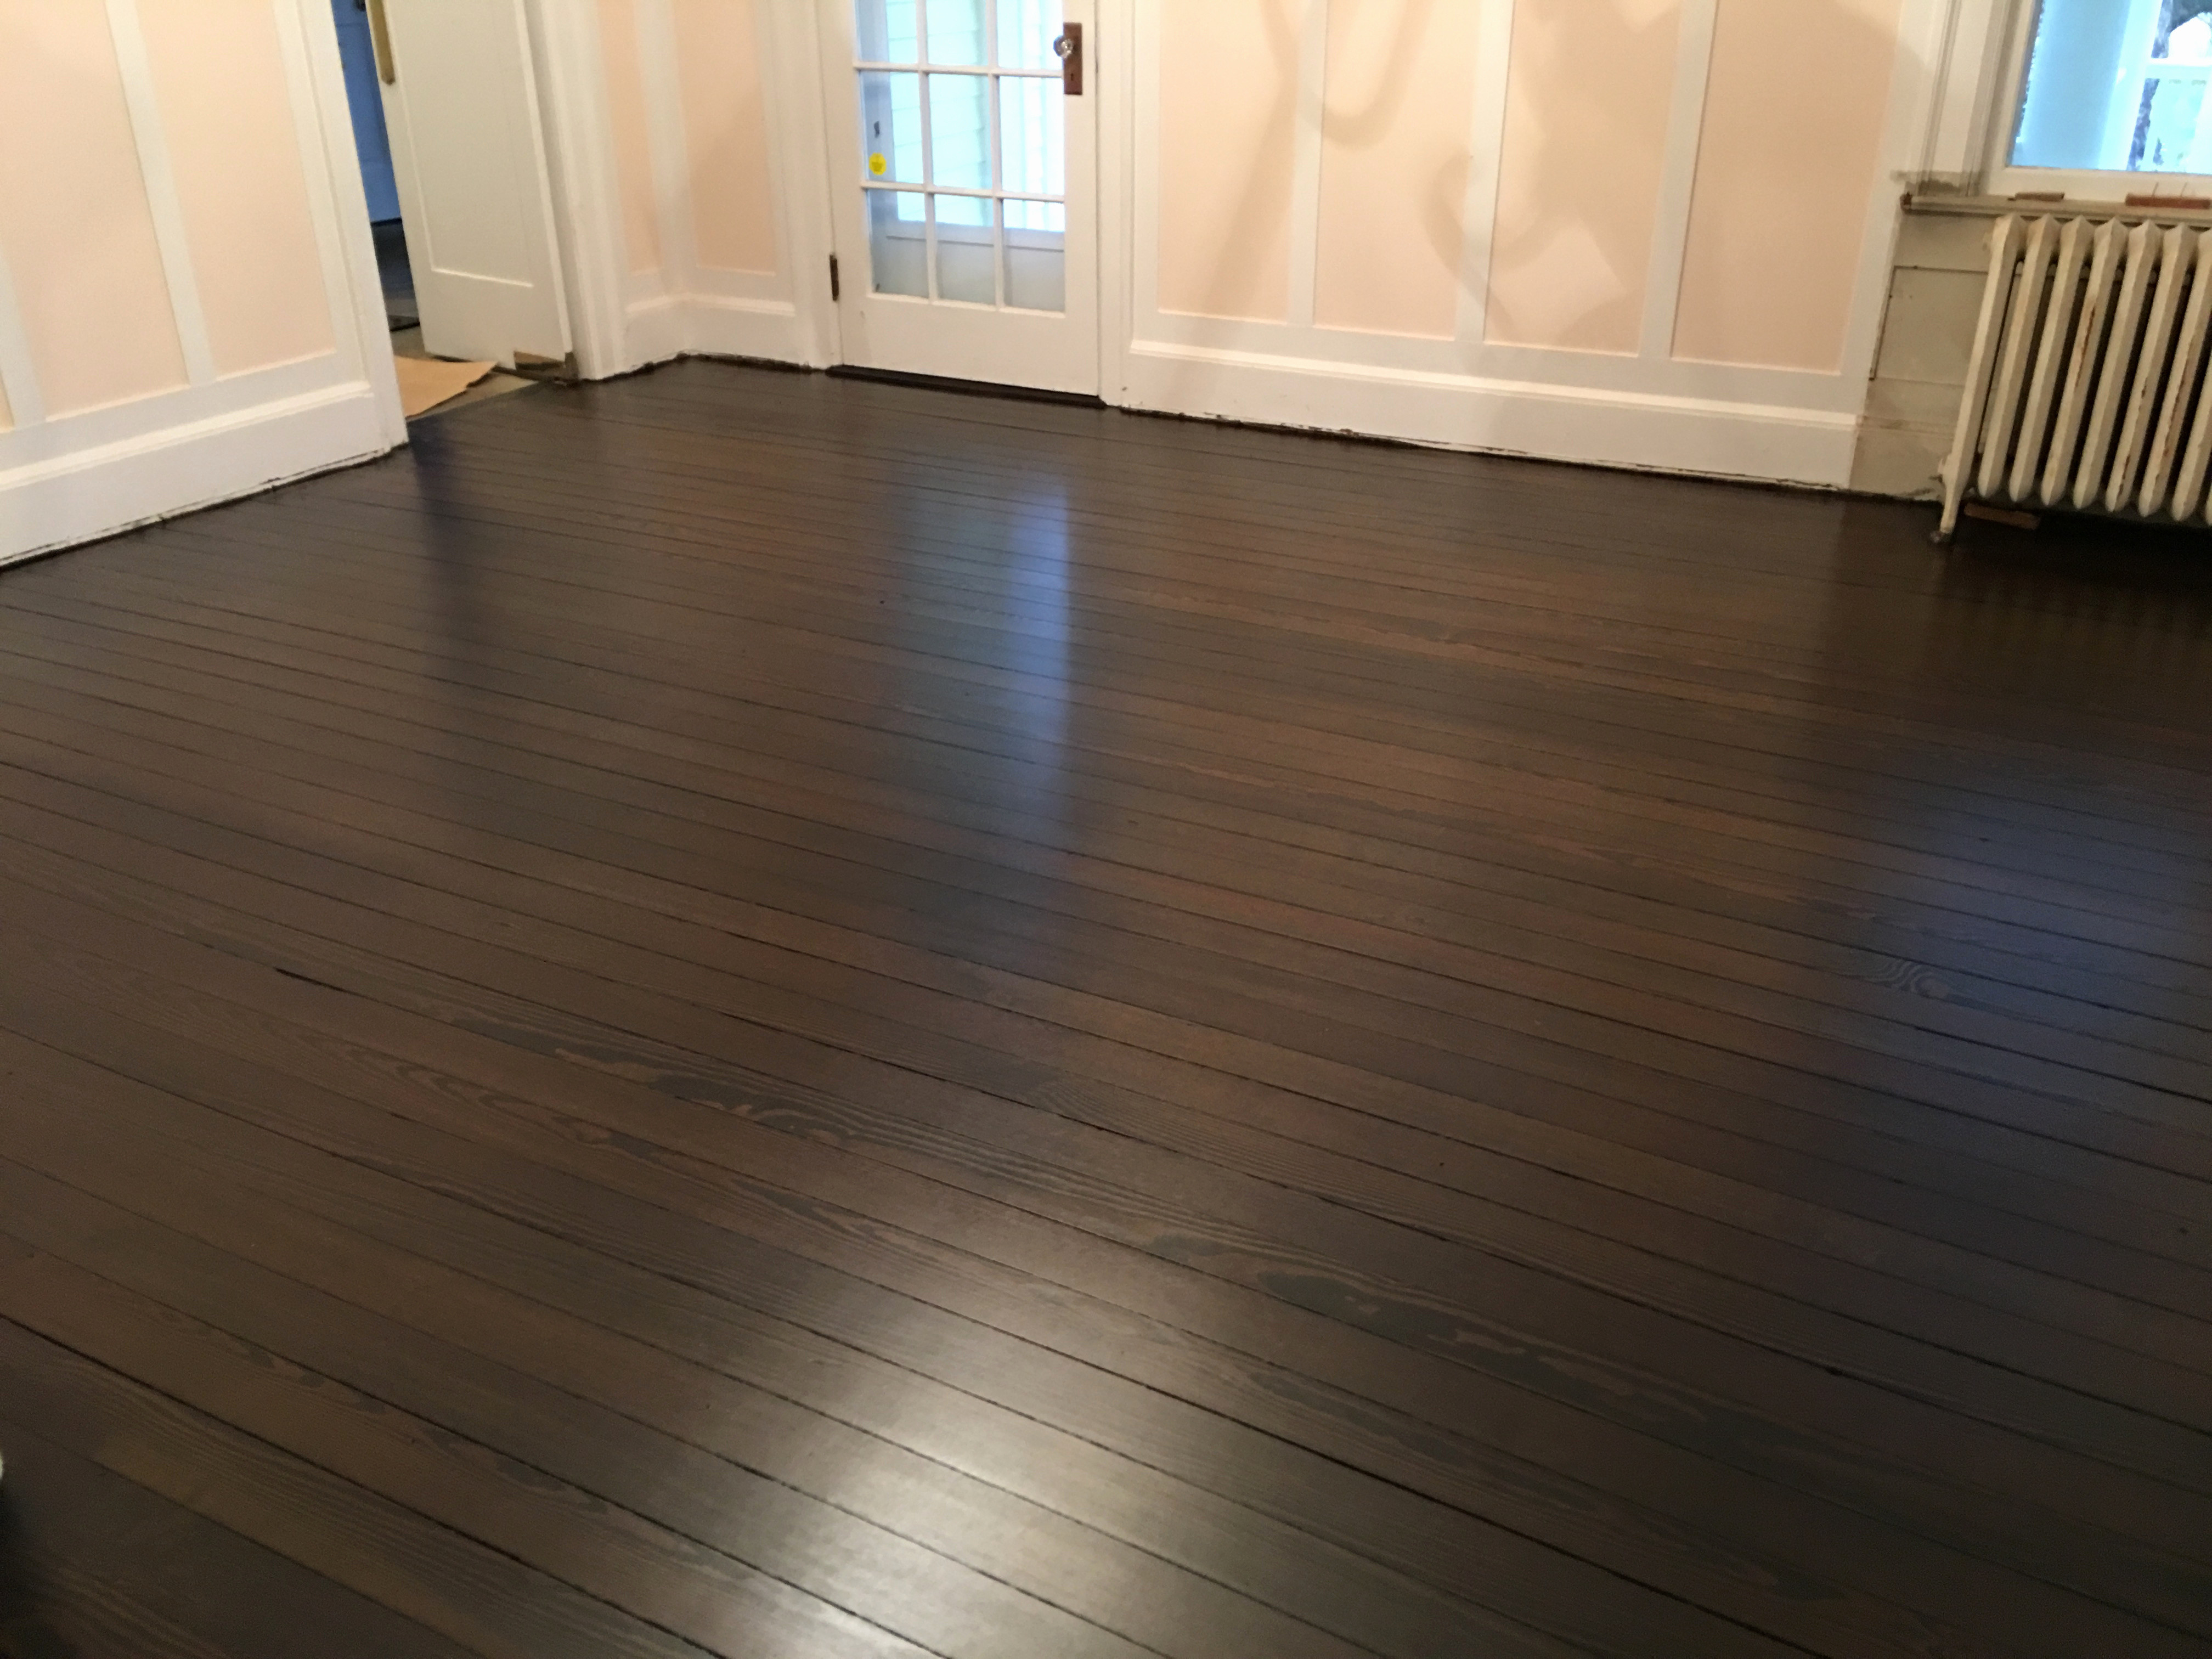 11 Famous Hardwood Flooring Trends for 2017 2022 free download hardwood flooring trends for 2017 of hardwoodfloor low voc canada archives wlcu pertaining to hardwood floor color trends 2017 elegant wood floor color trends cheap laminate wood flooring ha